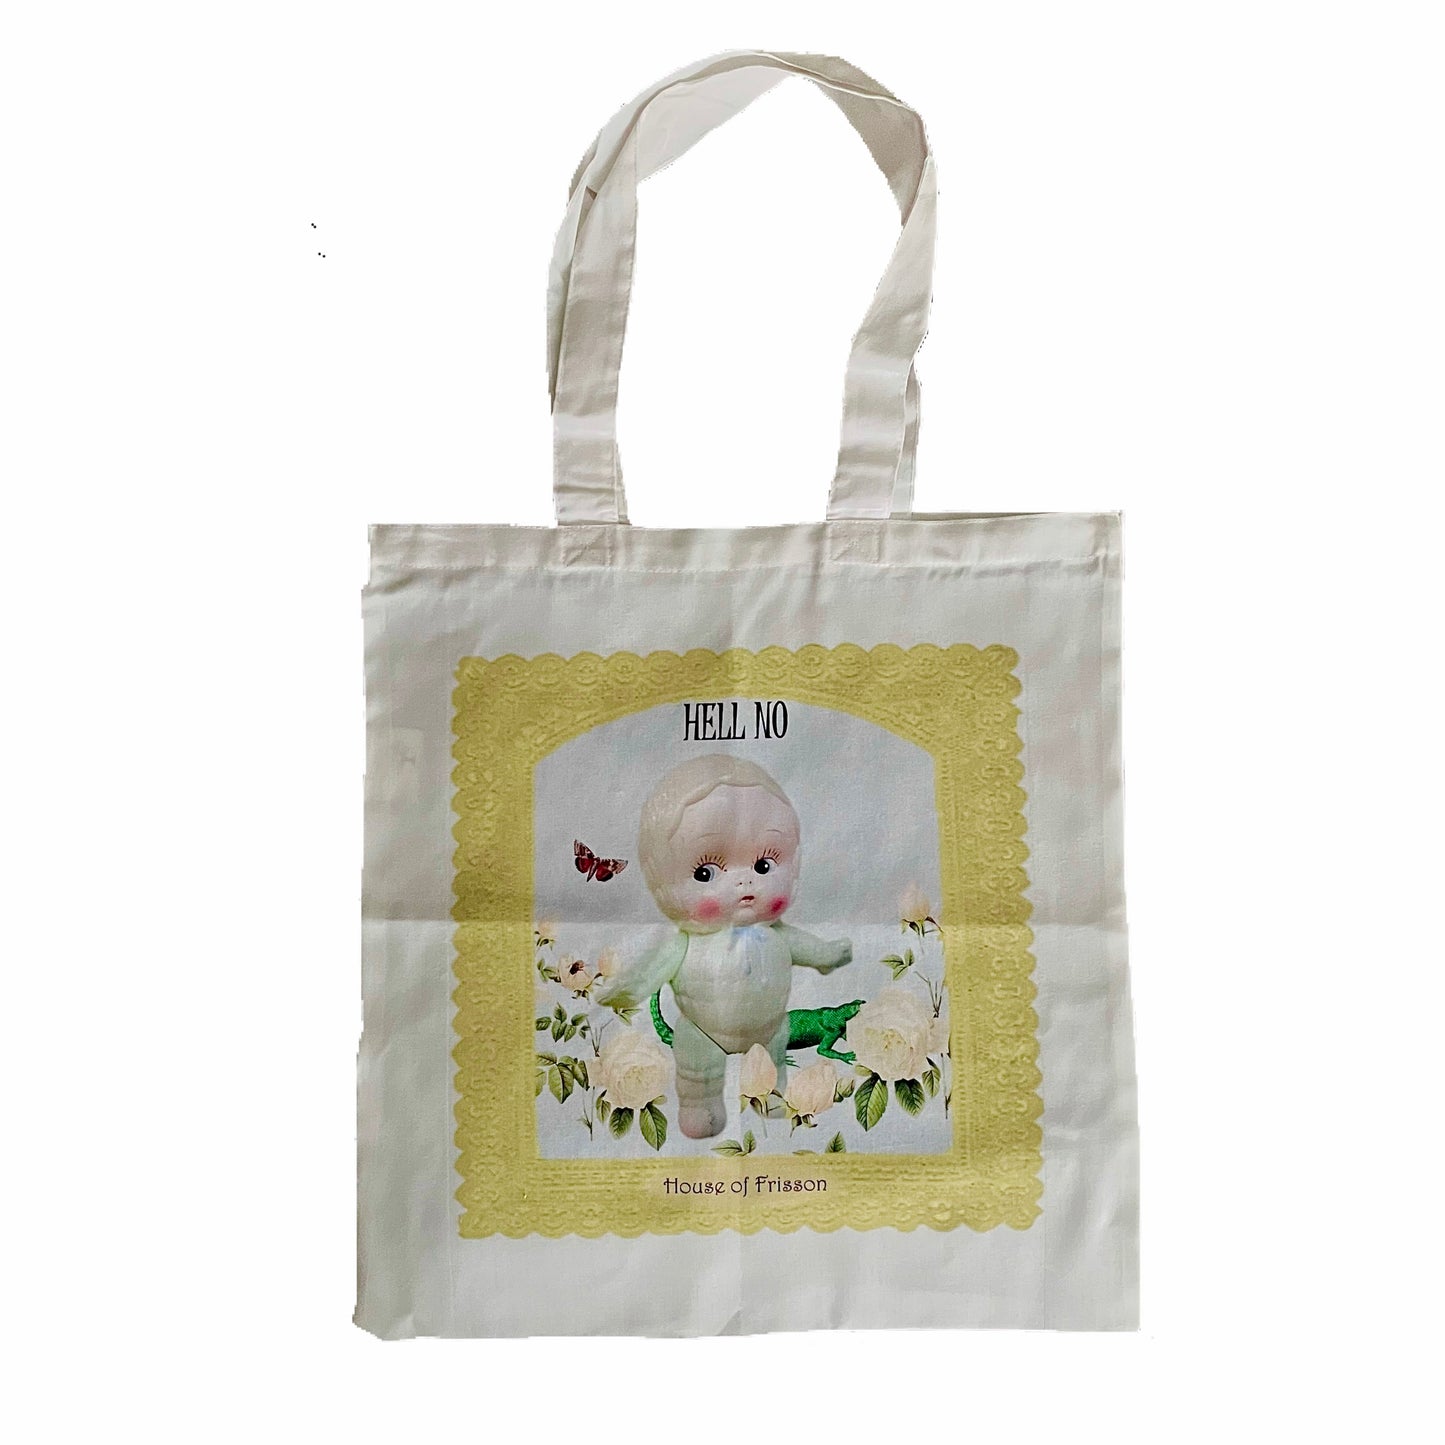 "Hell No" Tote Bag product photo by House of Frisson. Featuring a vintage kitsch plastic doll surrounded by flowers, a moth, and a lizard, framed by a yellow crochet.